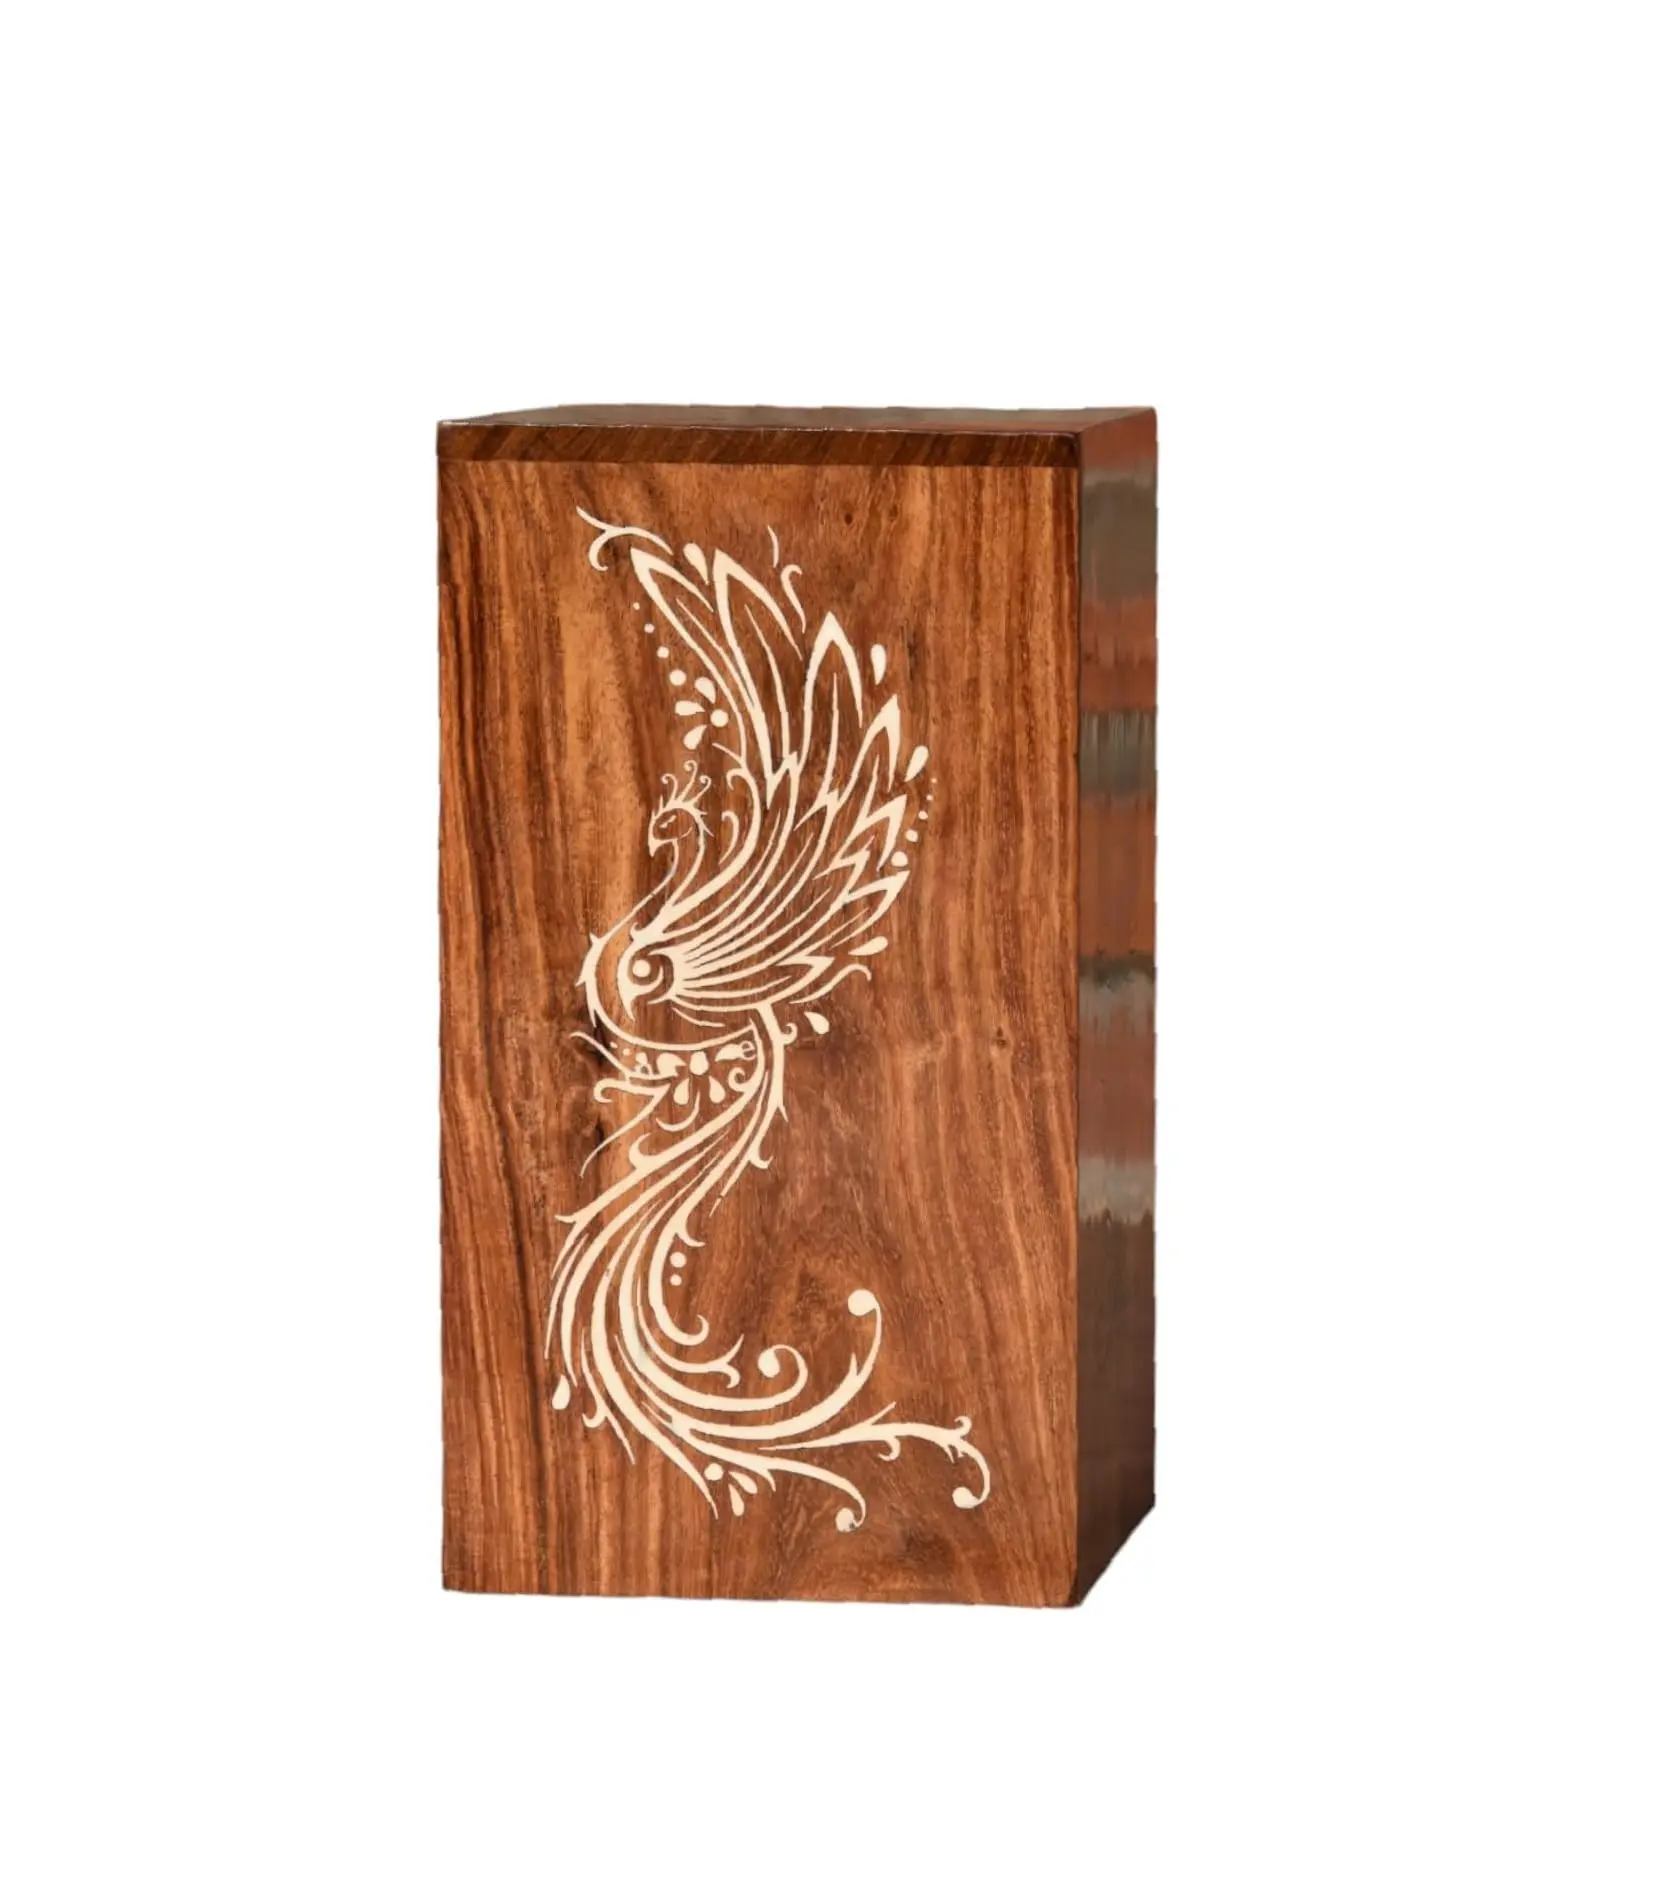 Handcrafted Peacock with Tree Figure Urn for Human Ashes Wooden Box with Lid Pet urn Cremation urn Burial Keepsake